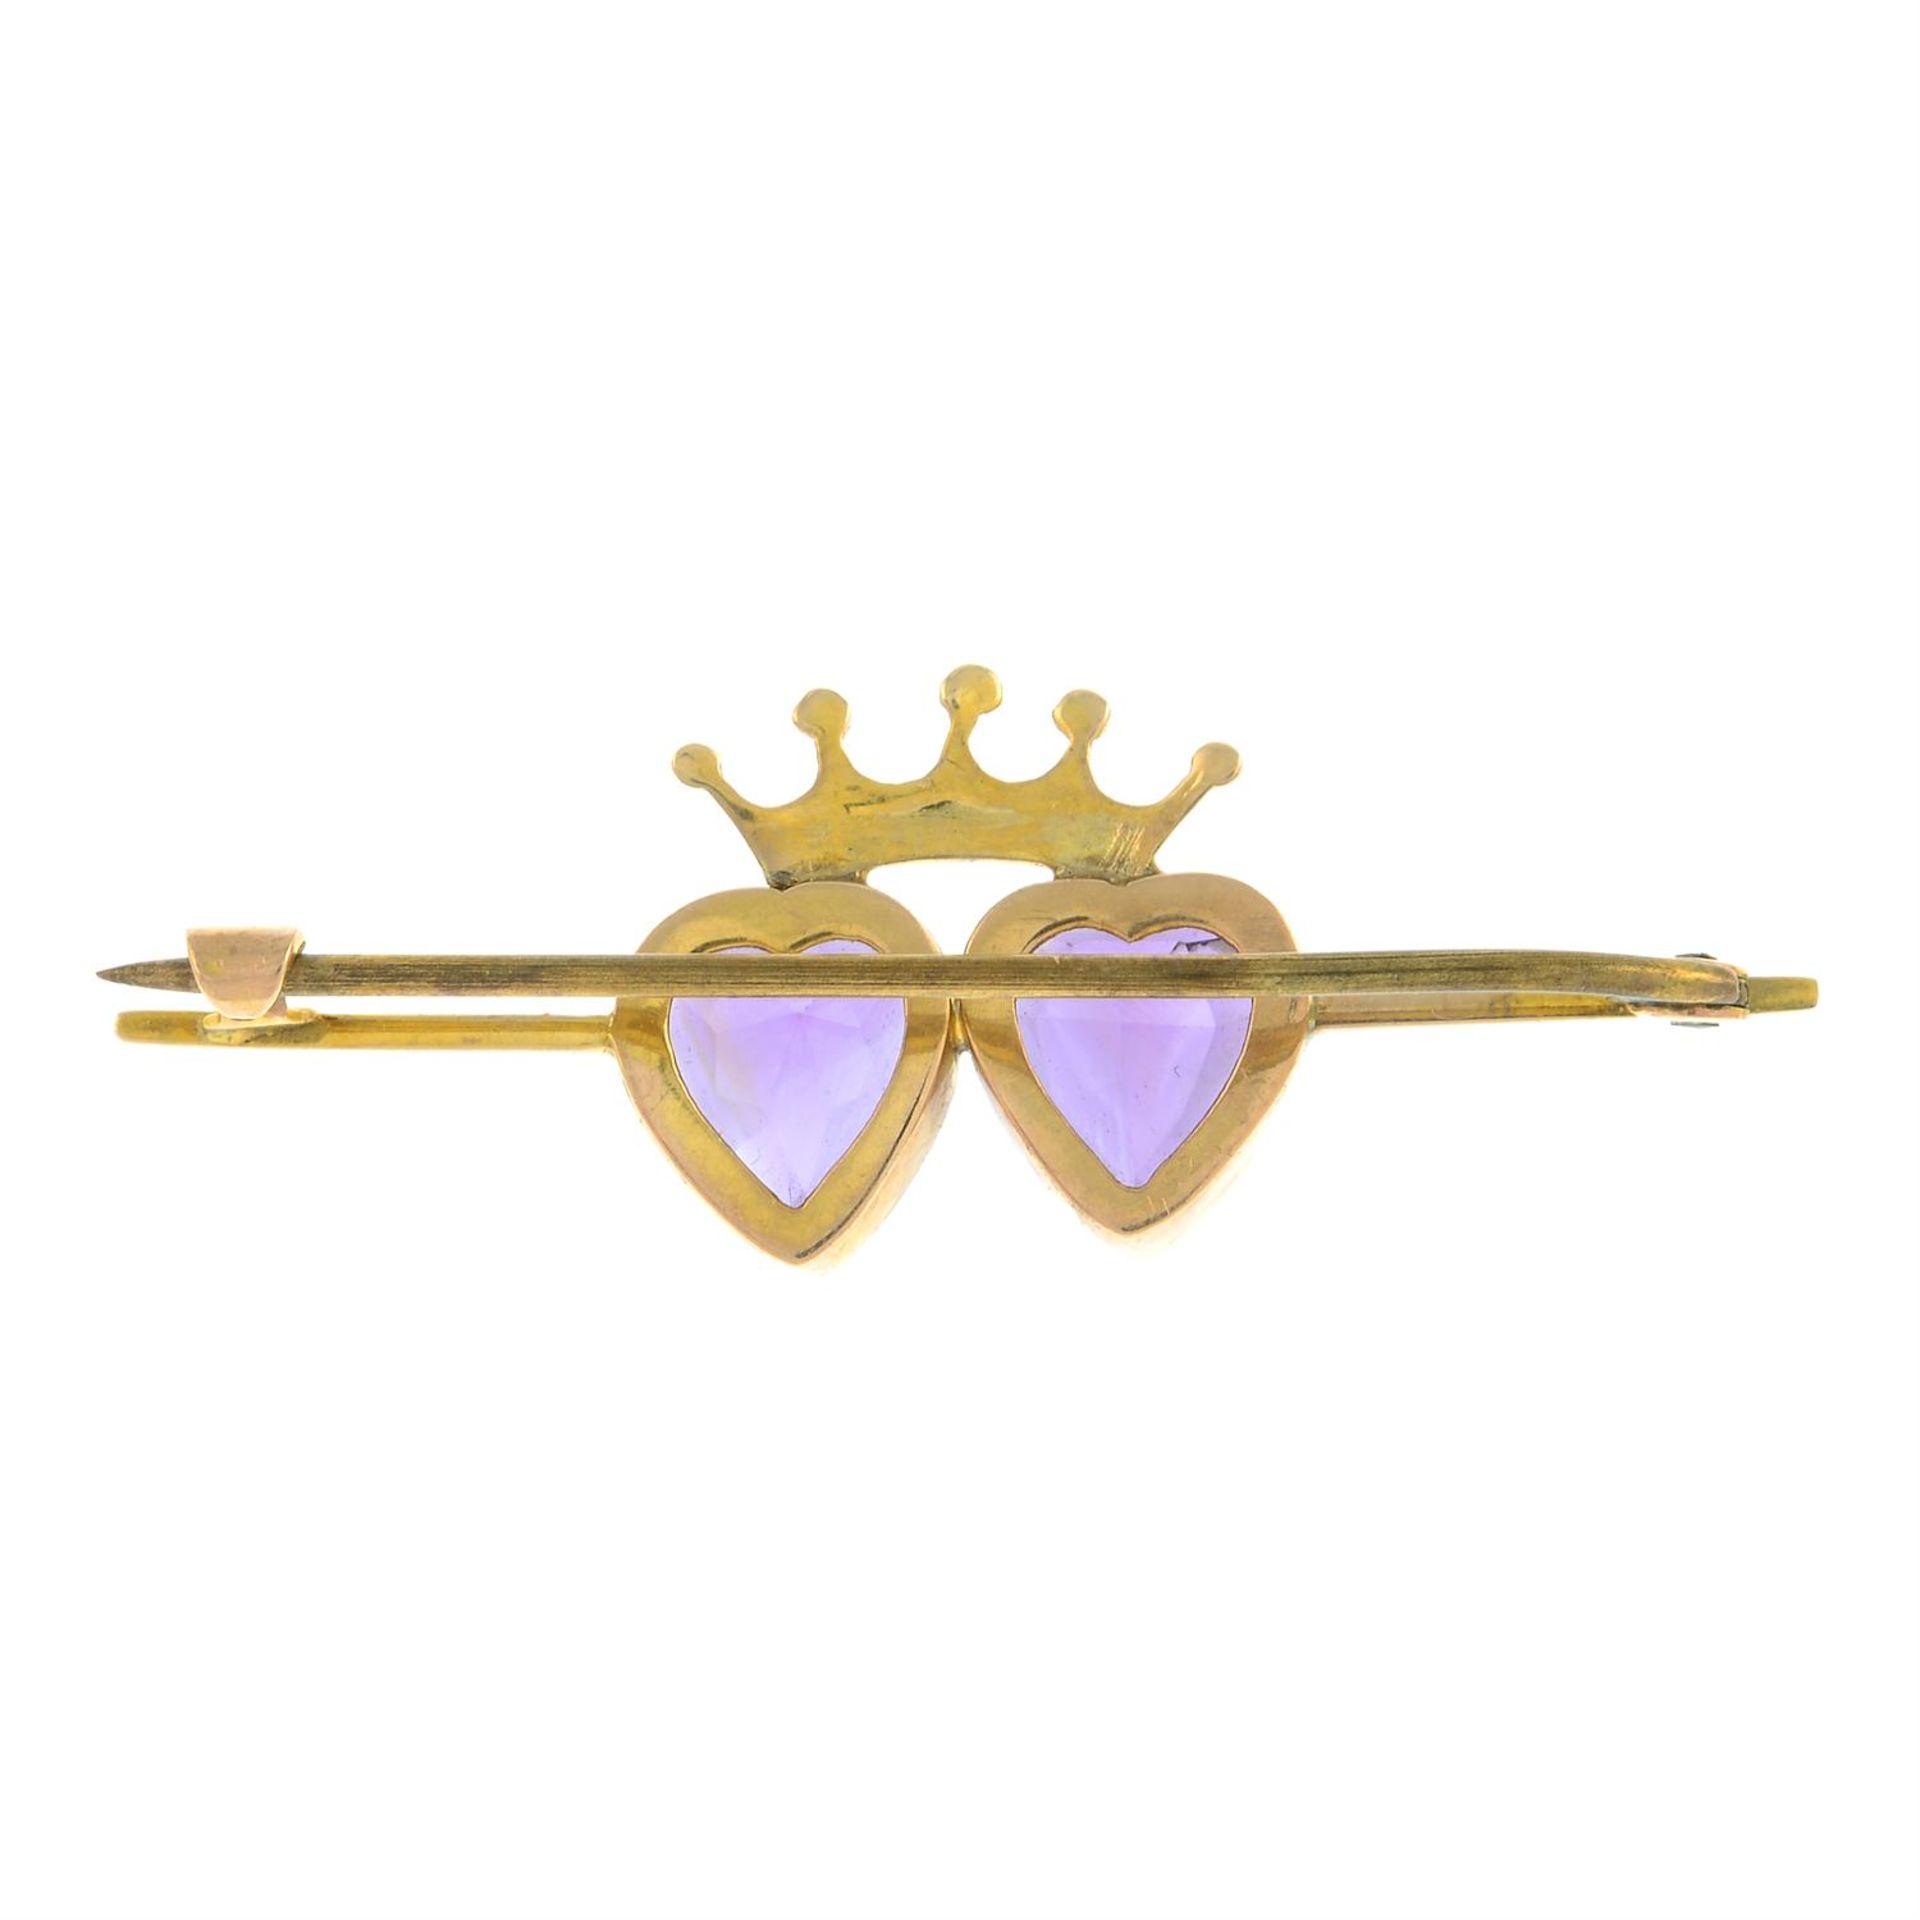 An early 20th century amethyst and seed pearl double heart and crown brooch. - Image 2 of 3